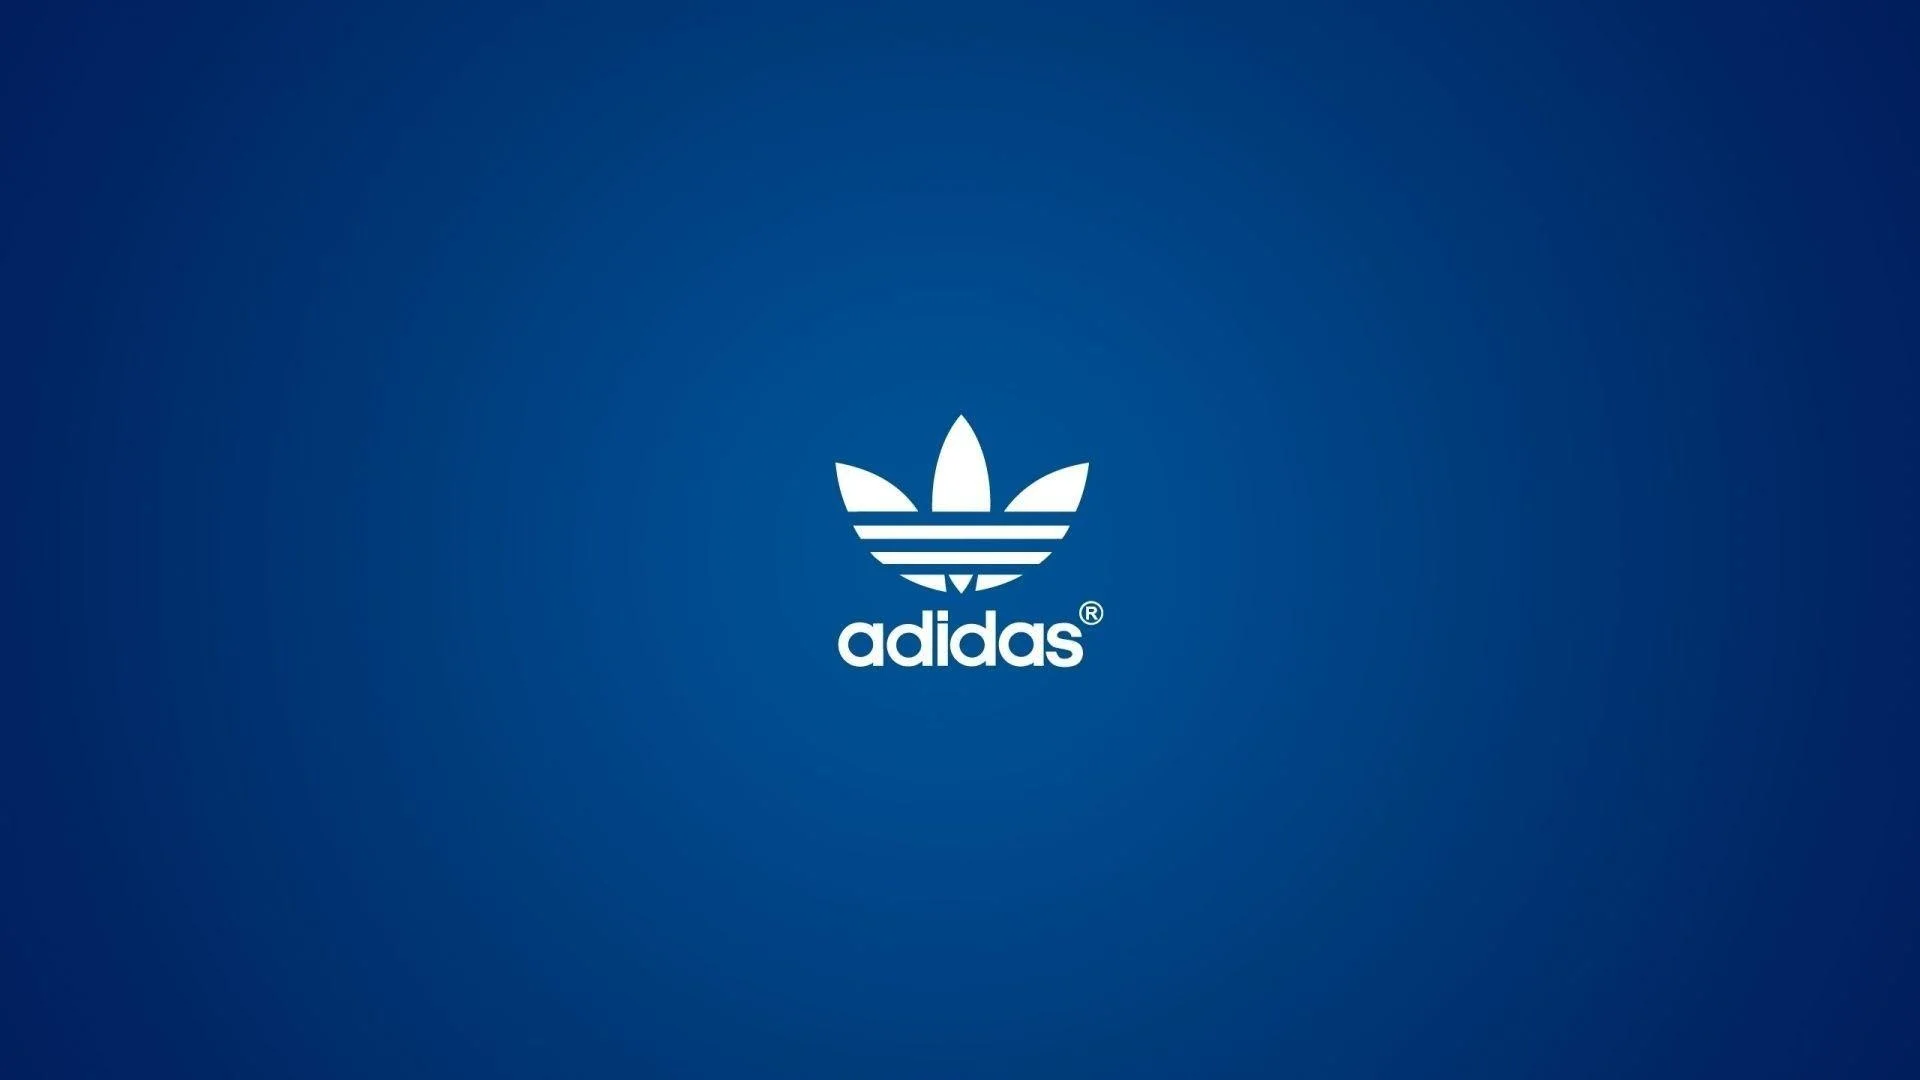 Free Adidas Logo Wallpaper HD pictures Download HD pictures